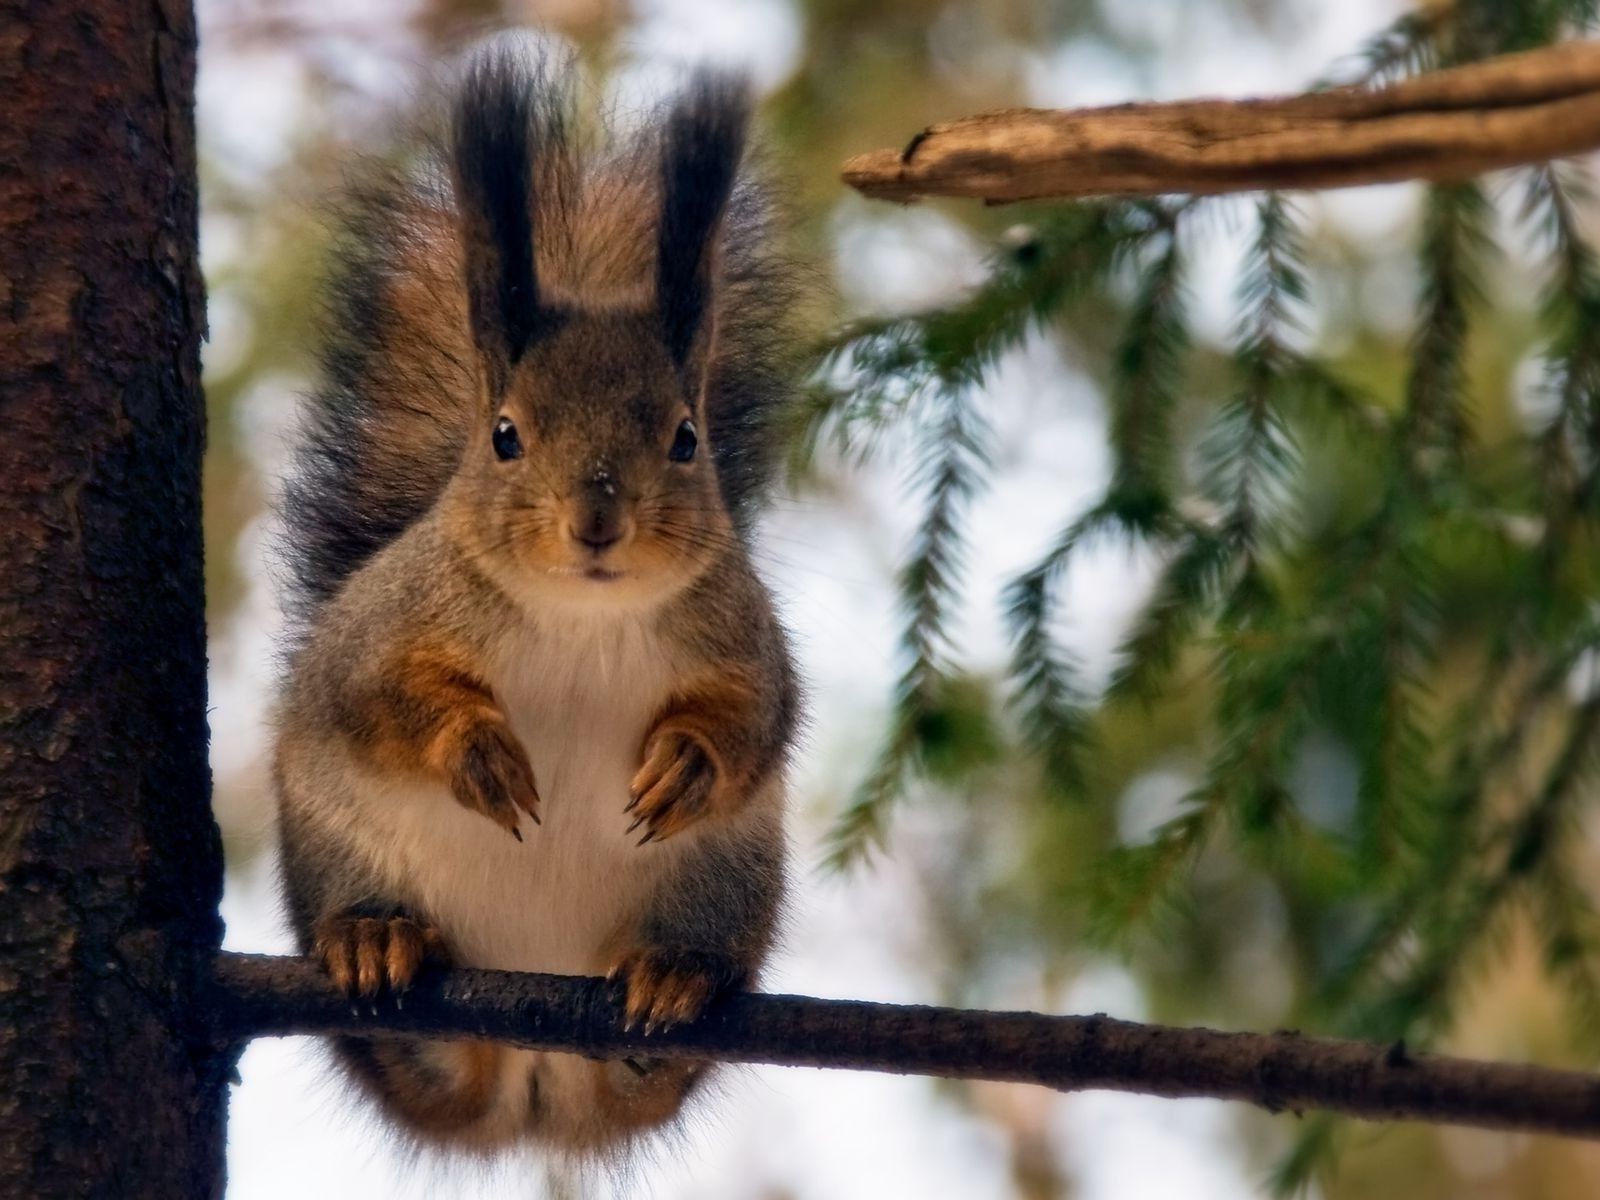 proteins tree mammal squirrel wildlife rodent nature portrait wood nut cute fur animal outdoors wild